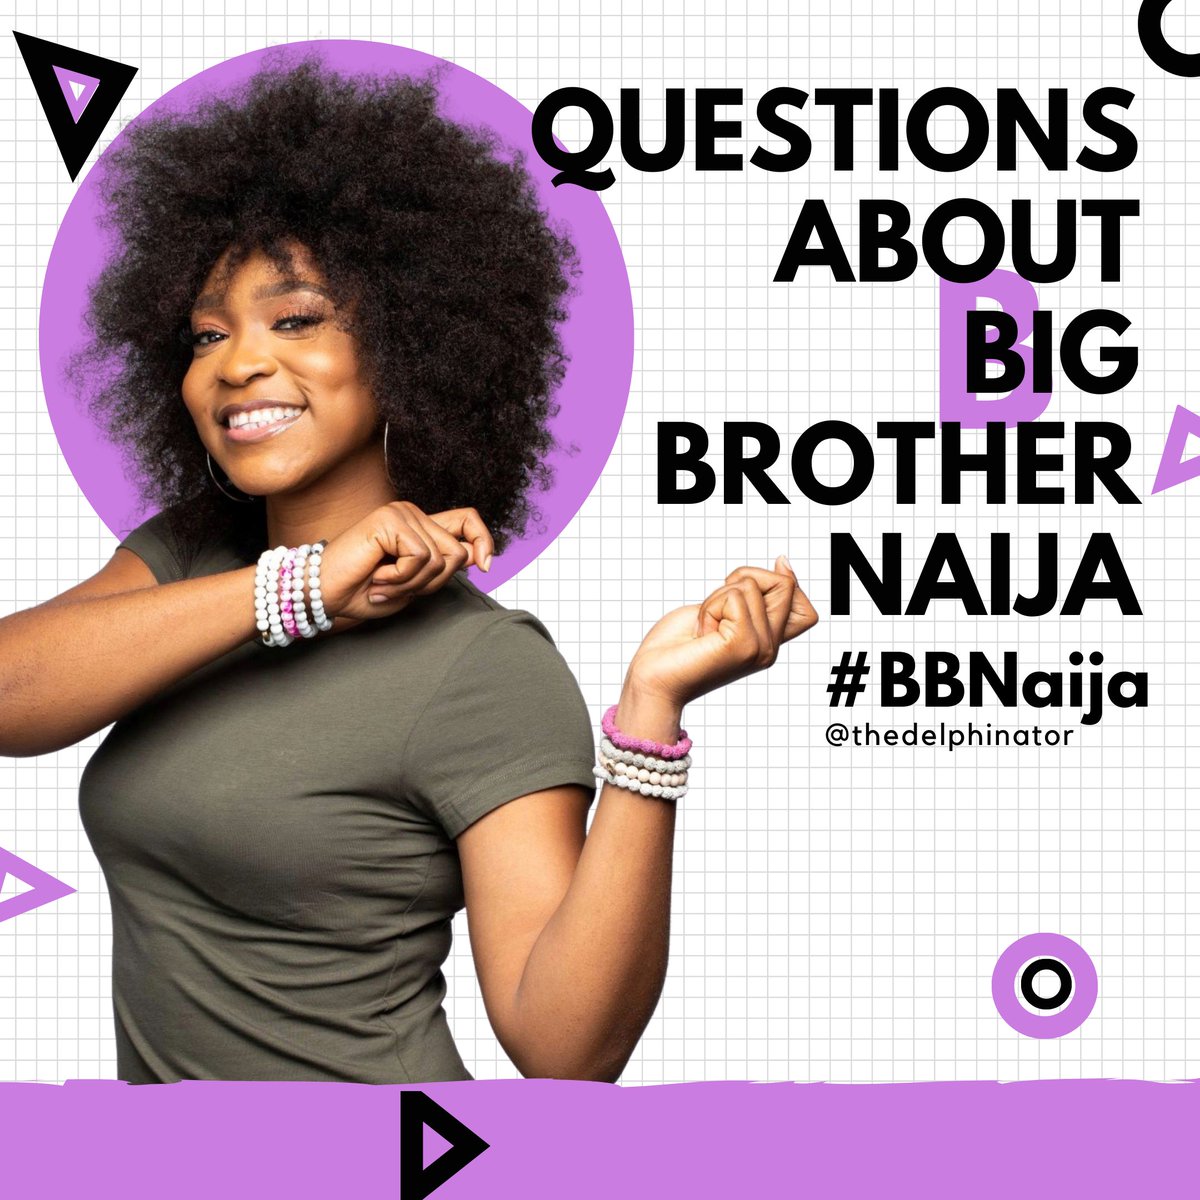 Dear World People,QUESTIONS ABOUT BBNAIJA I'm posting this not just because several people have asked but because the Lord instructed me to address this. I hope you learn something from this story.⠀ #BBNaija  #bbnaijialockdown